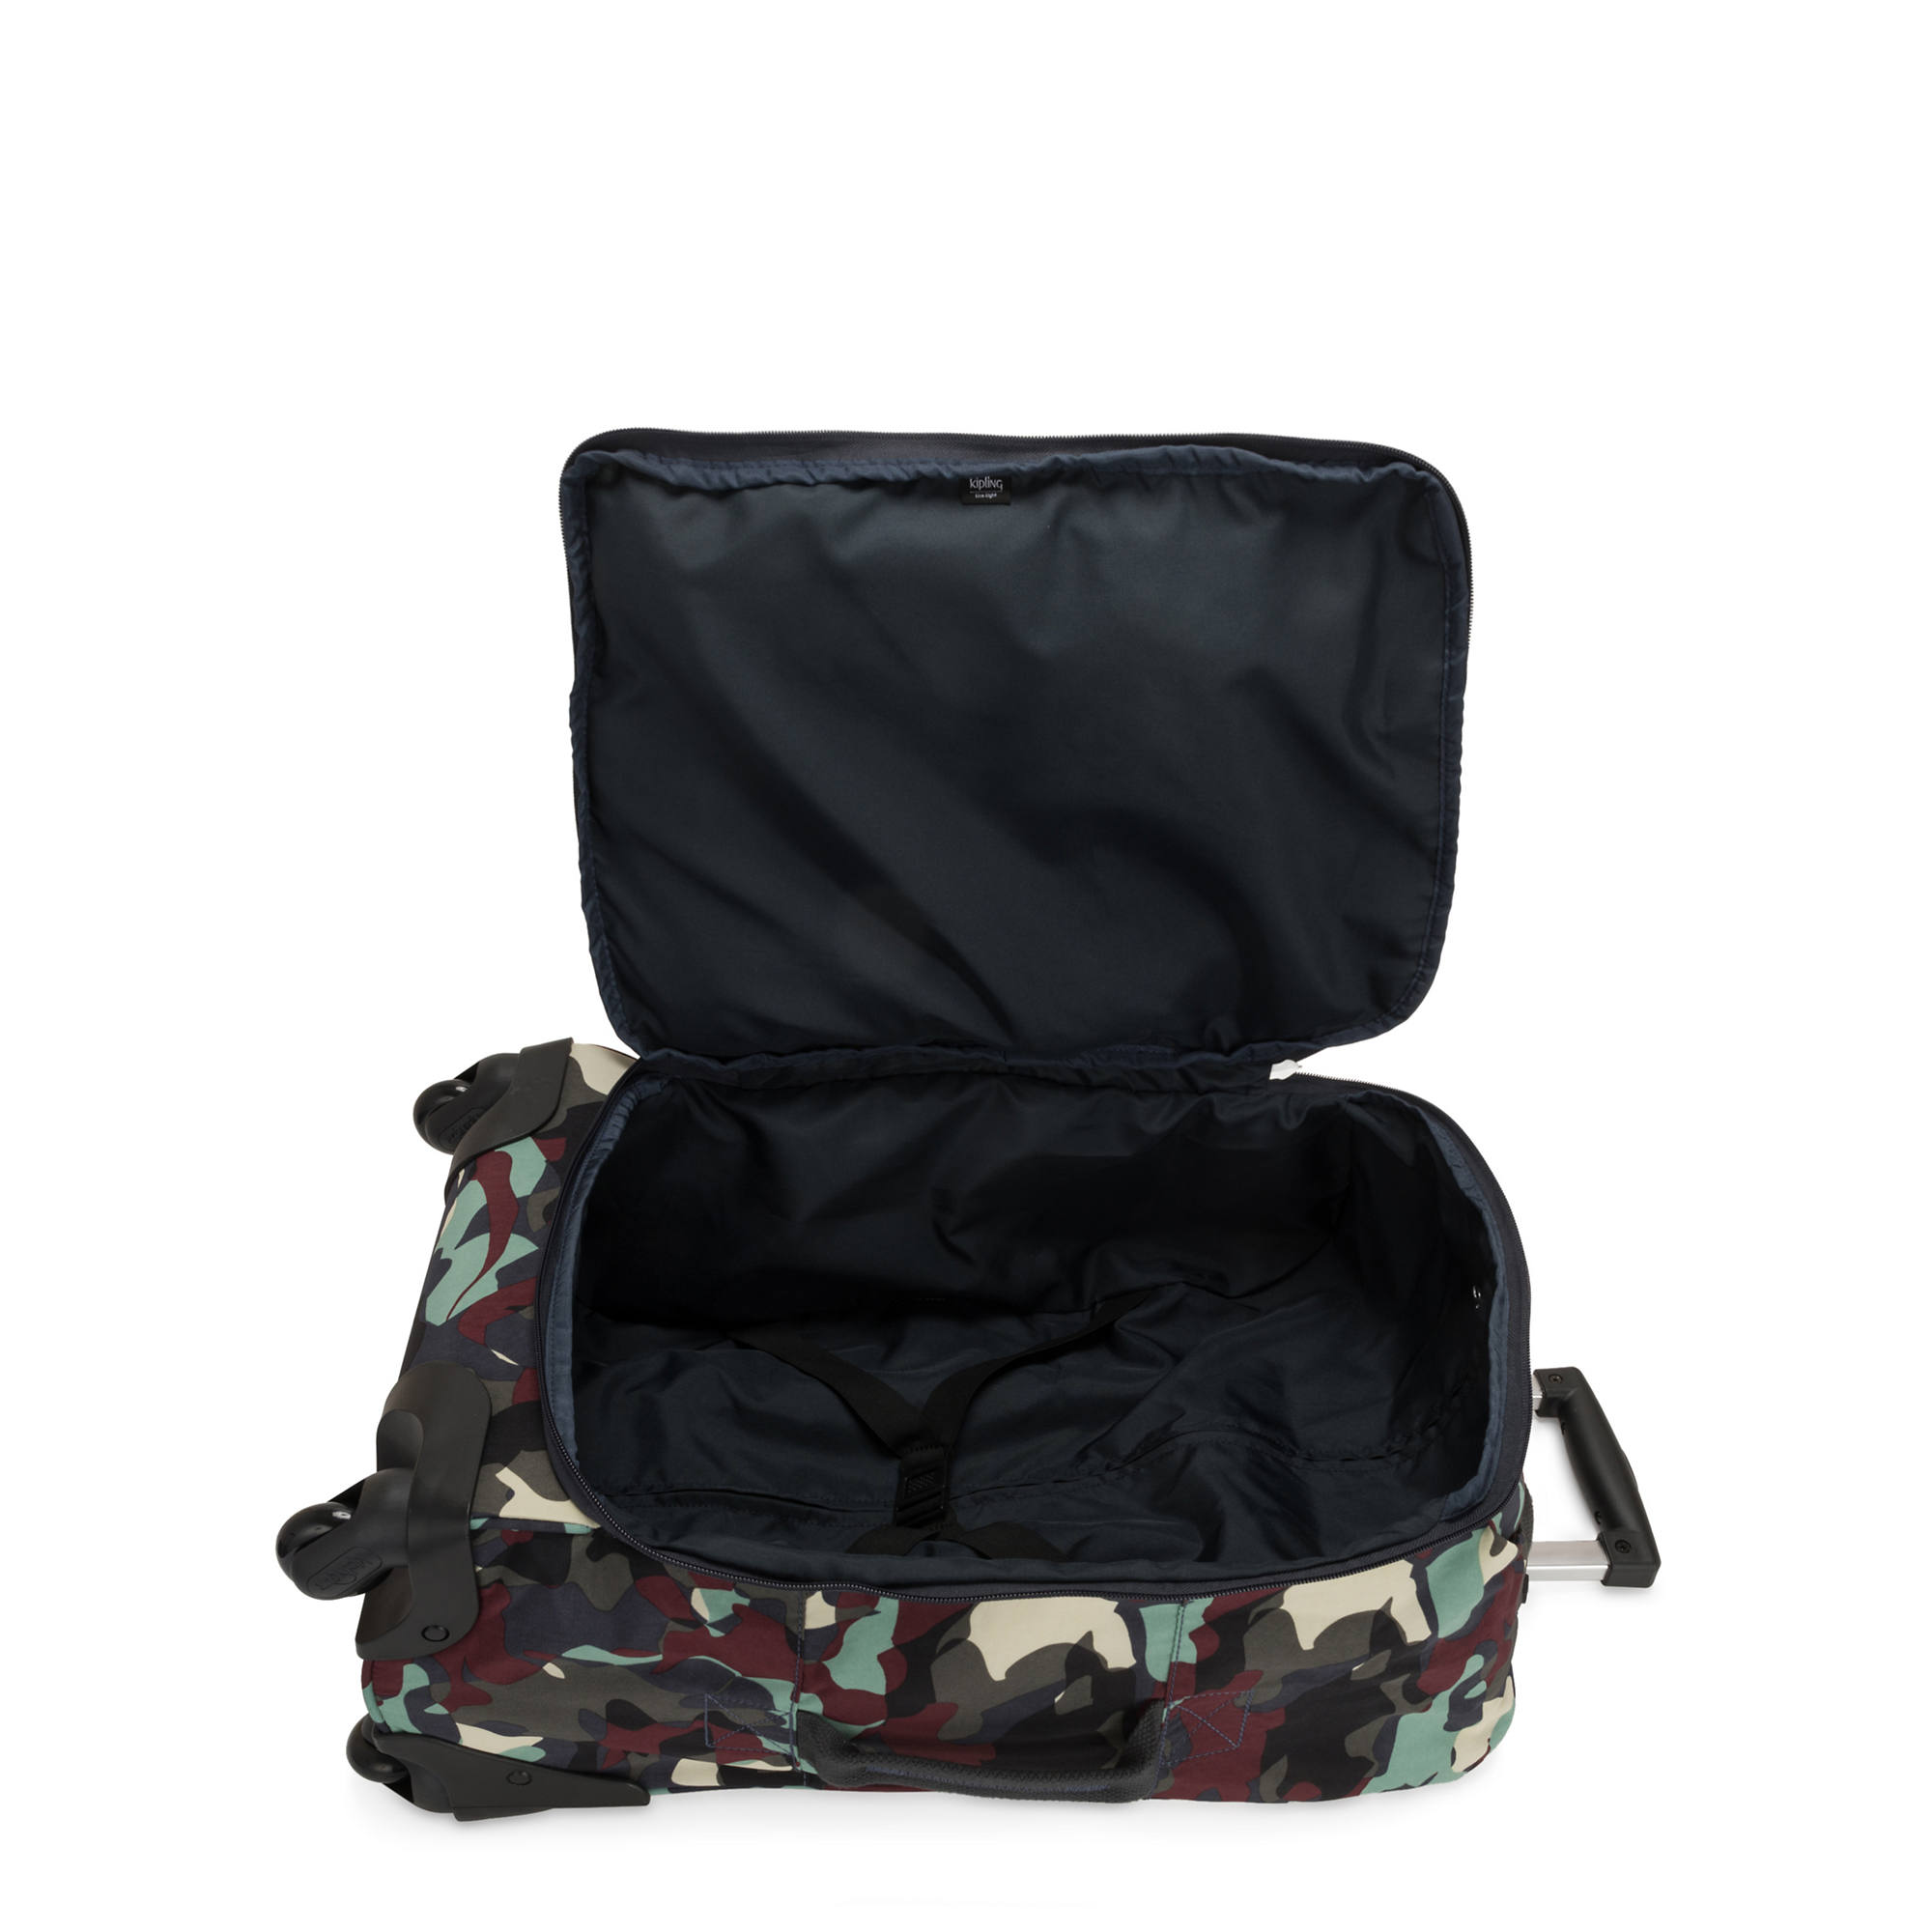 Kipling Small Carry-On Rolling Luggage | eBay